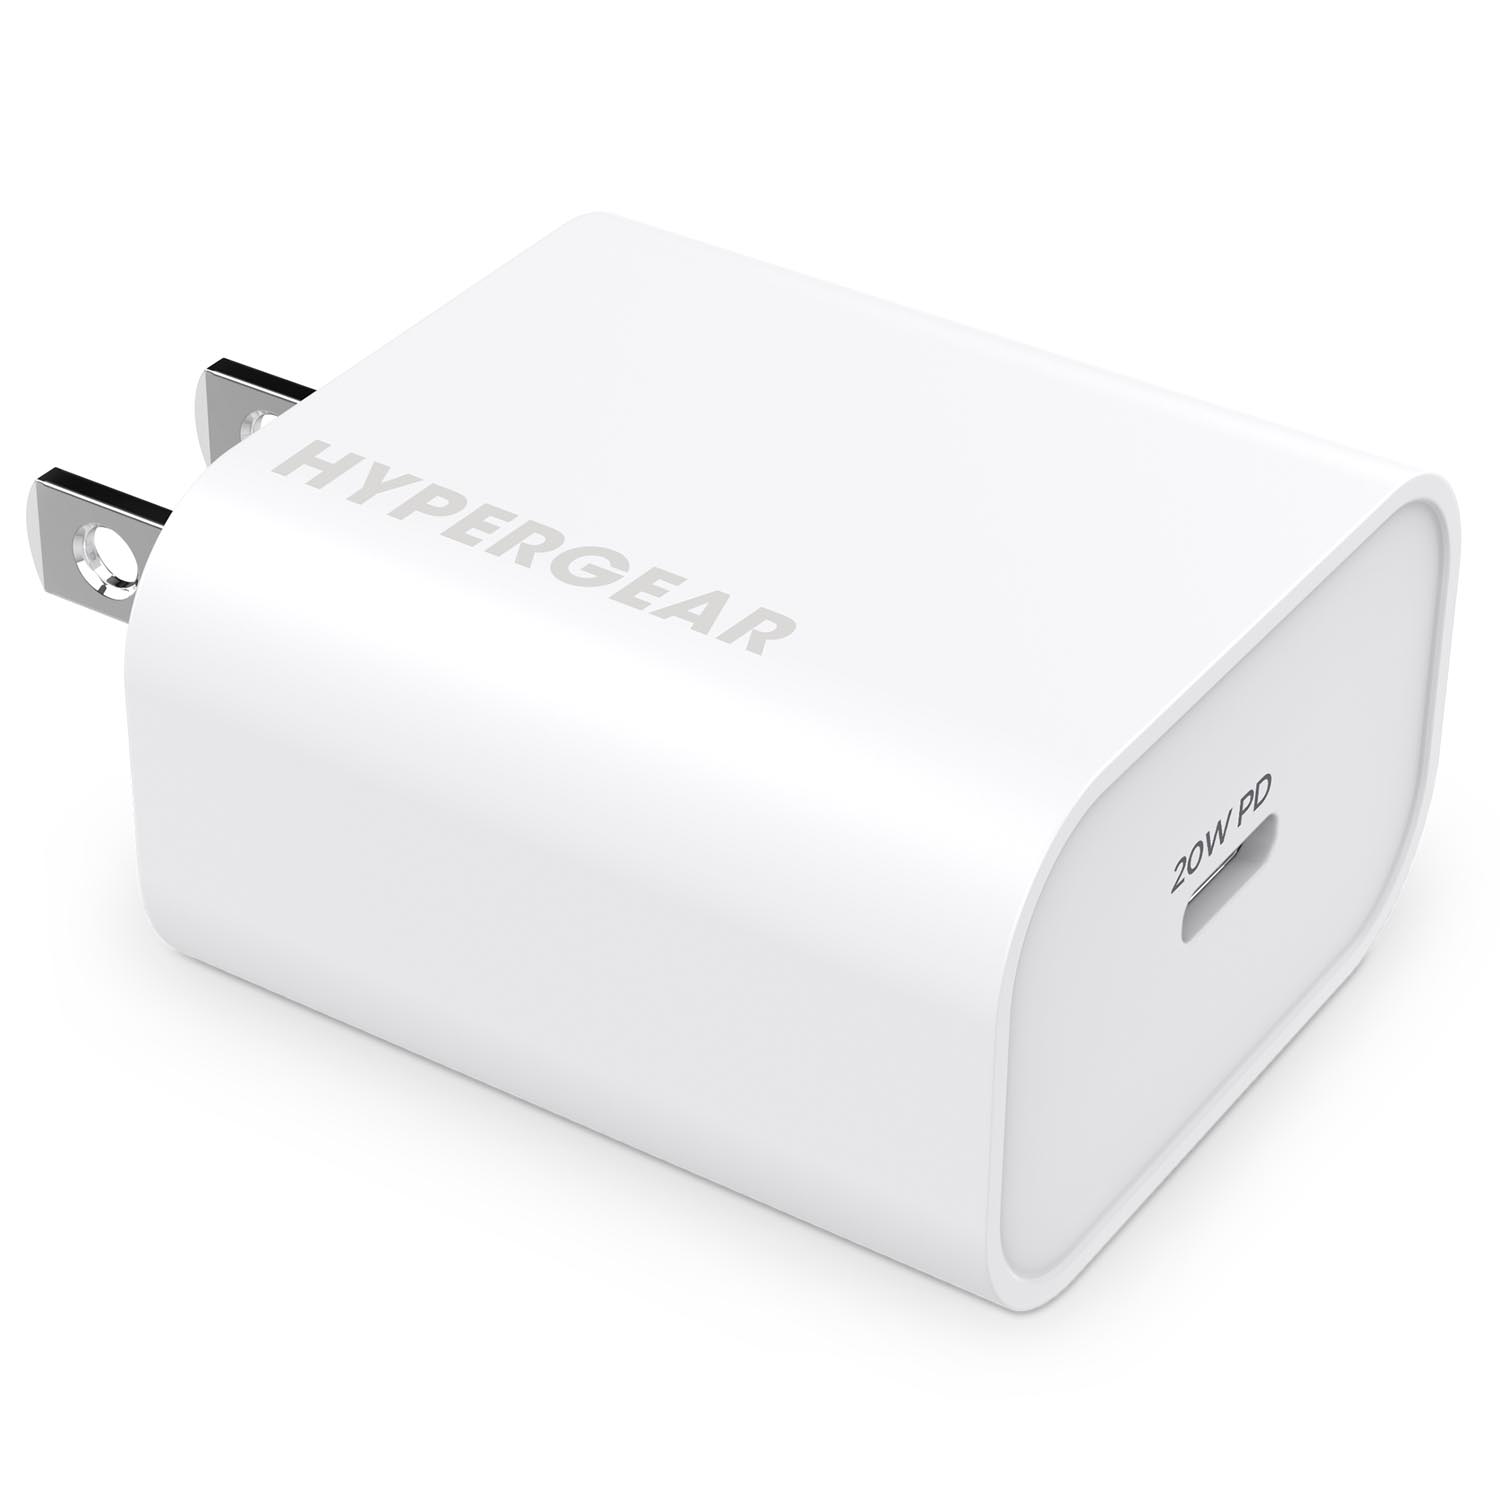 HyperGear 20W USB-C PD Wall Charger White